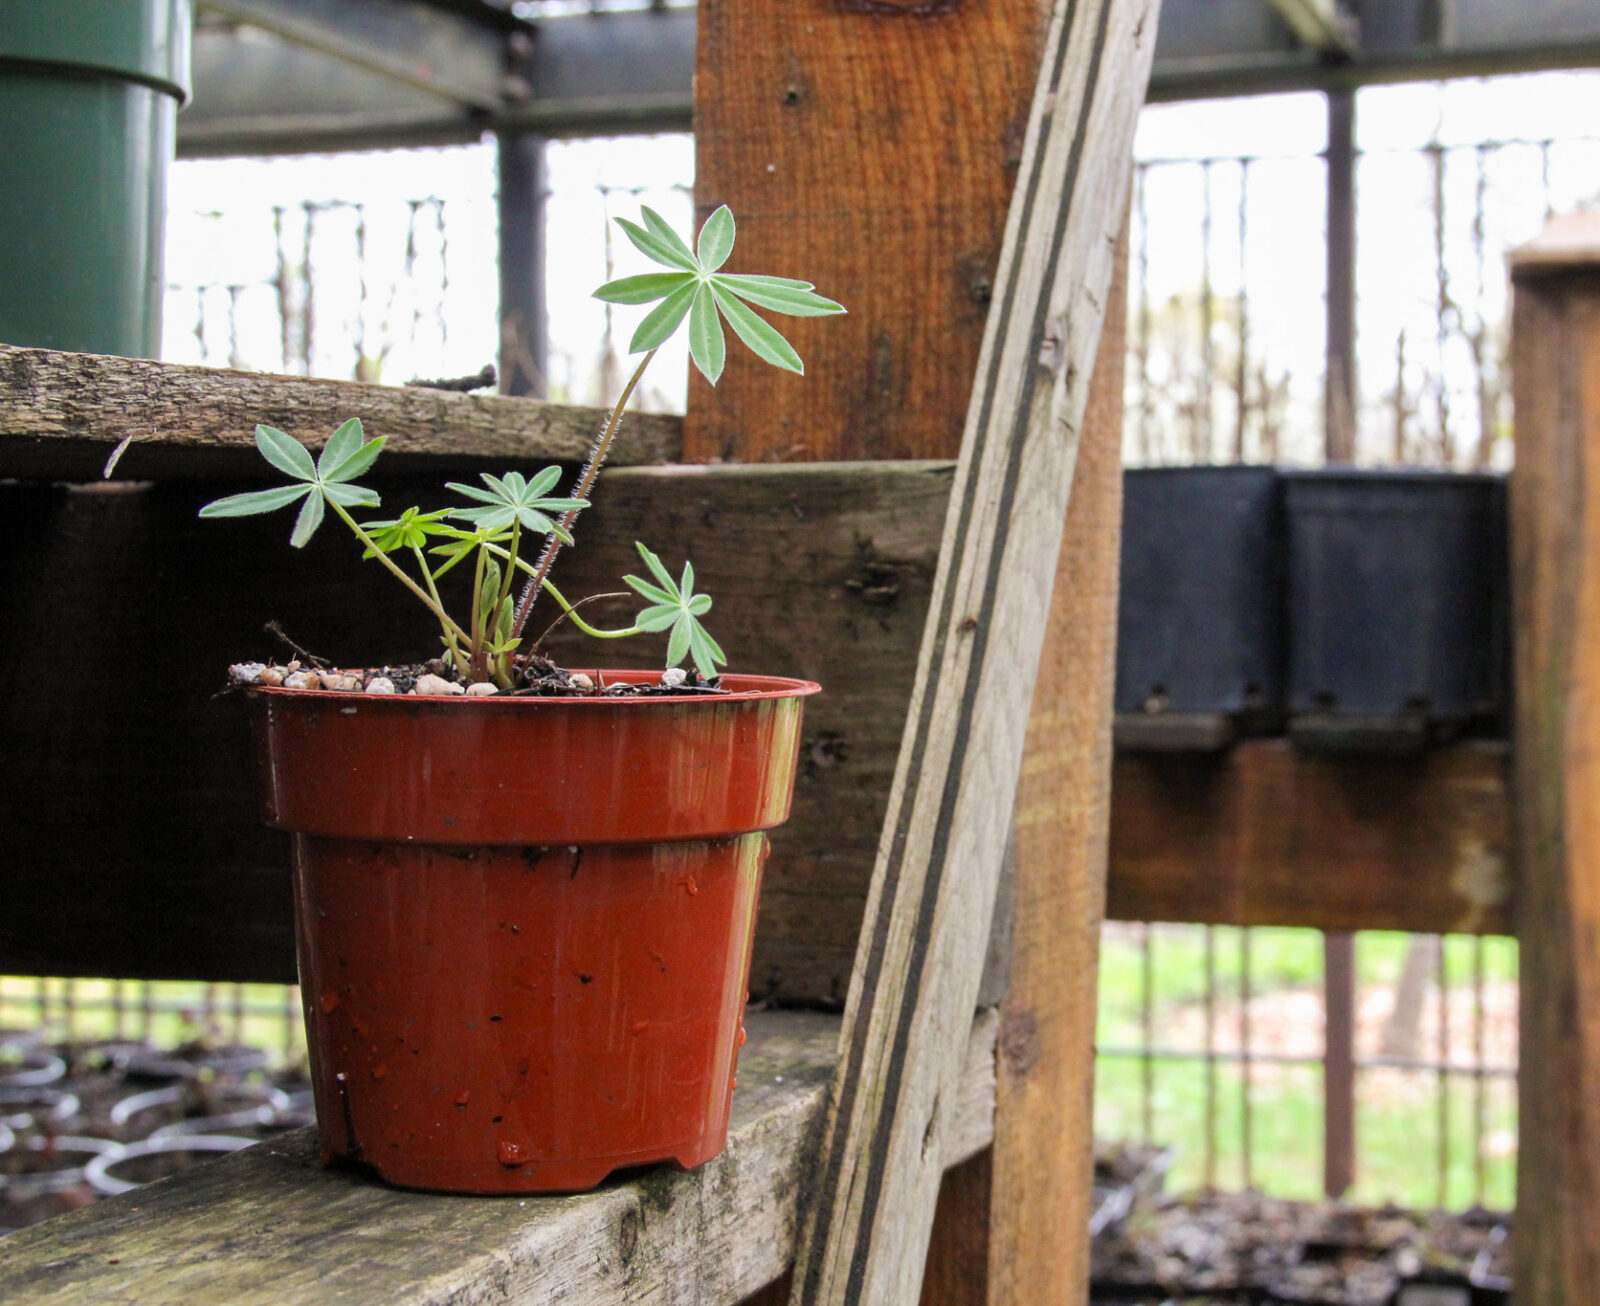 A lupine plant in a terracotta-coloured plastic pot is sitting on a wooden shelf to the left. There are plants in black plastic pots sitting on a shelf in the background.